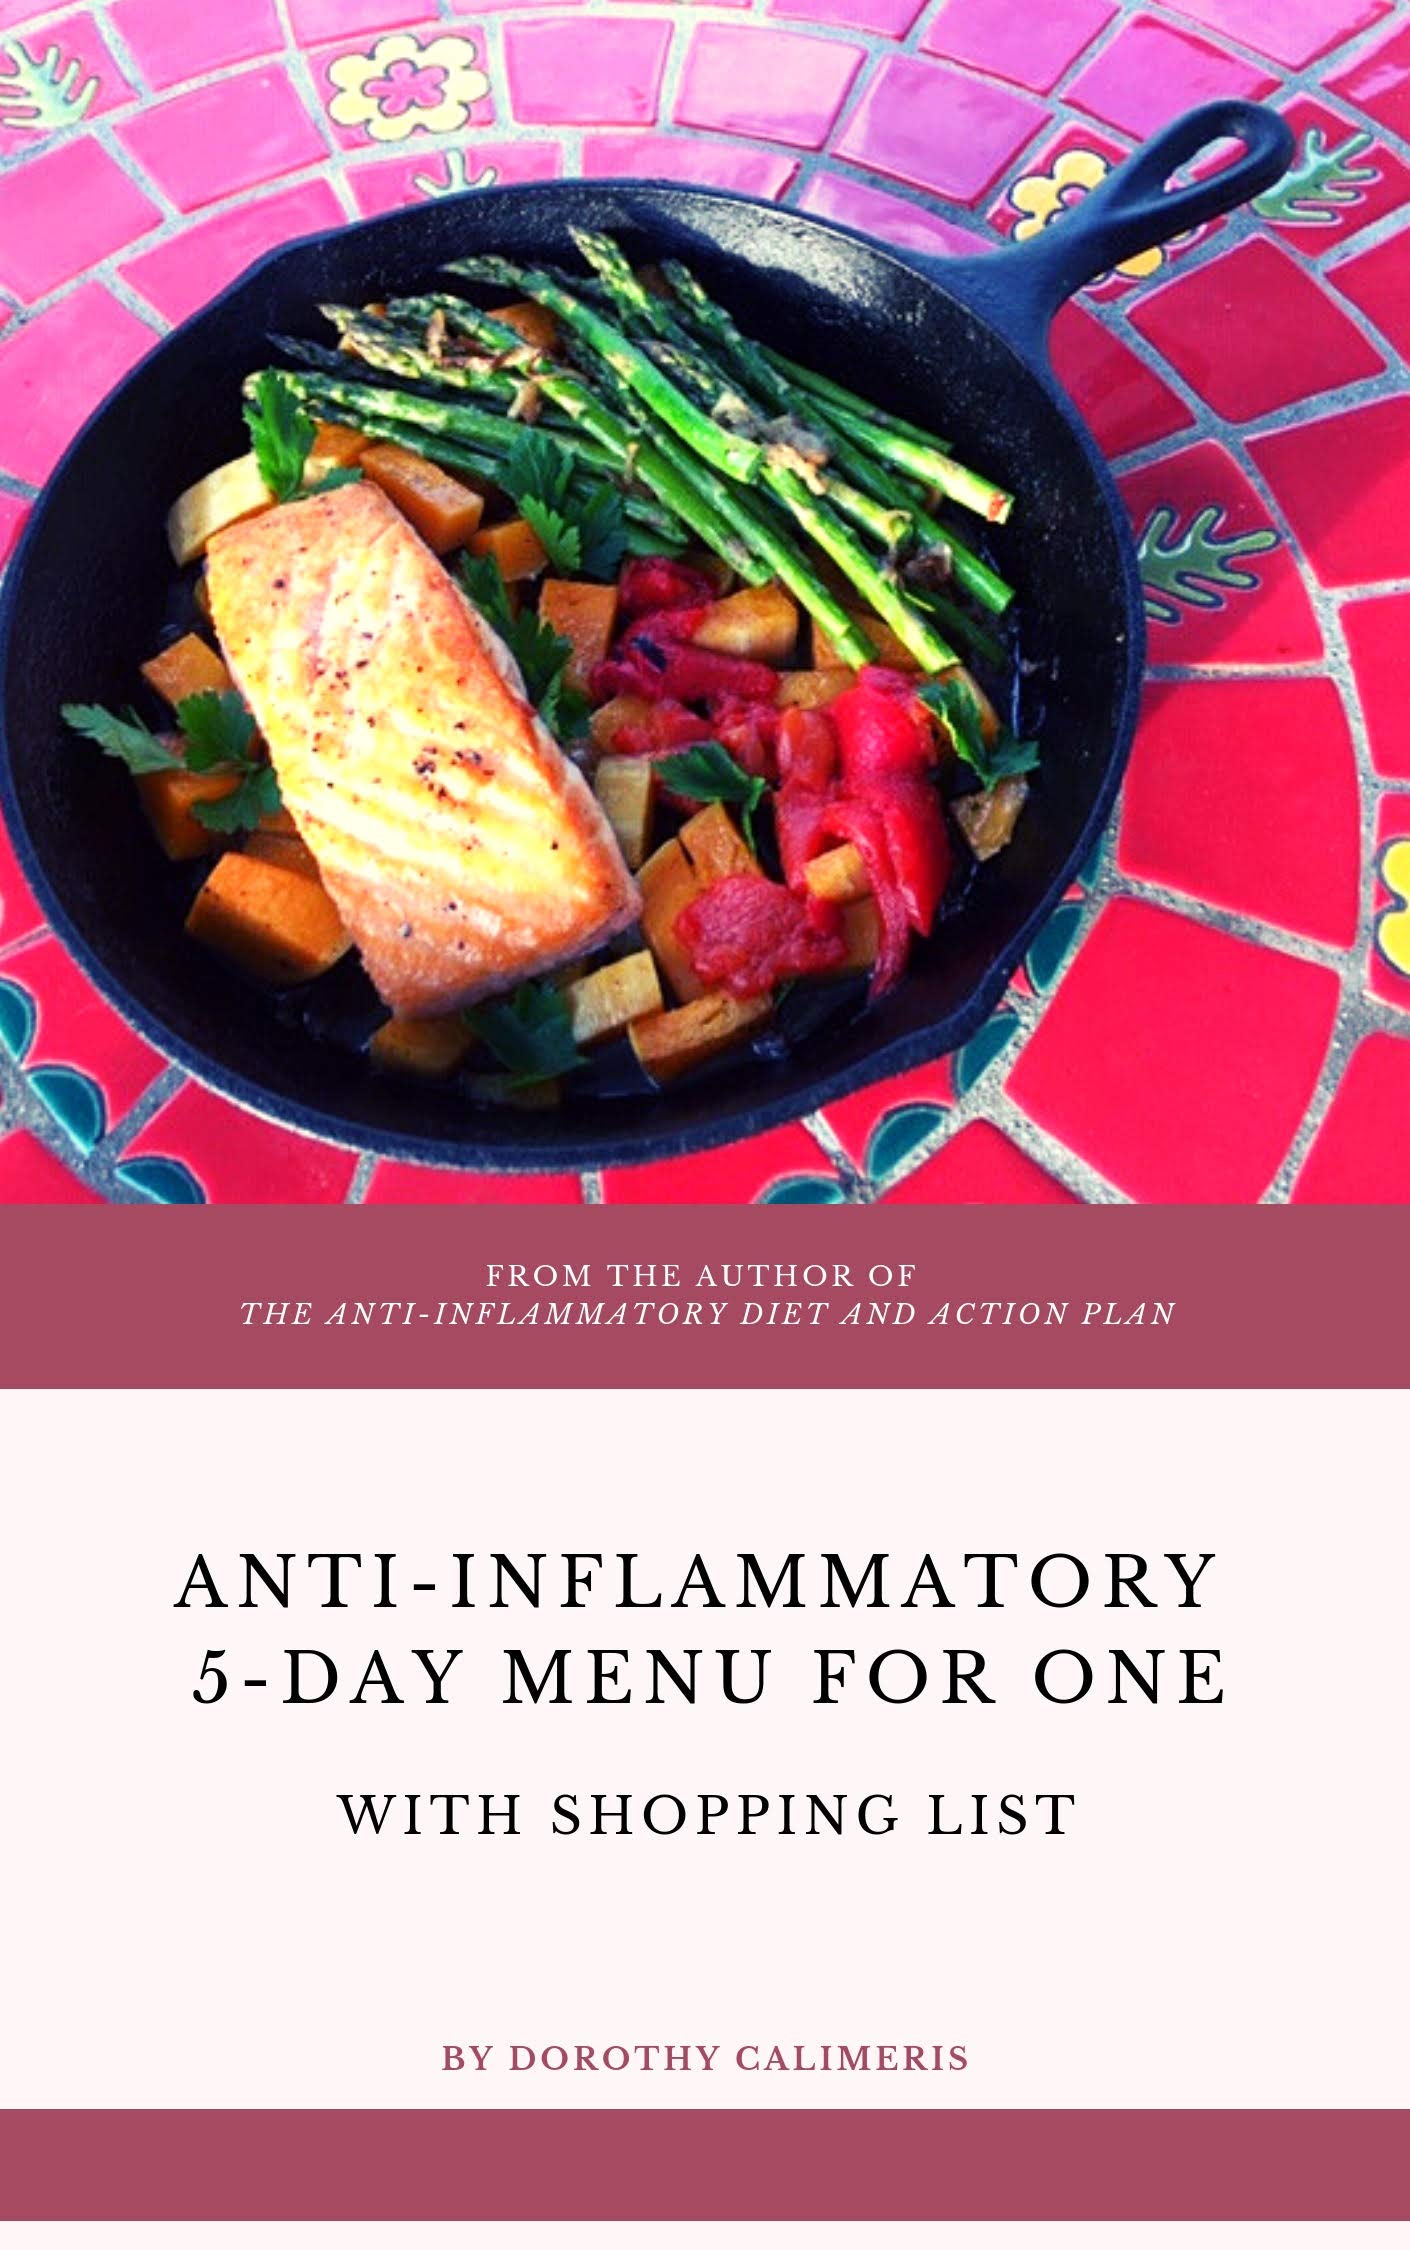 5 Day Anti-Inflammatory Menu for One: With Shopping List